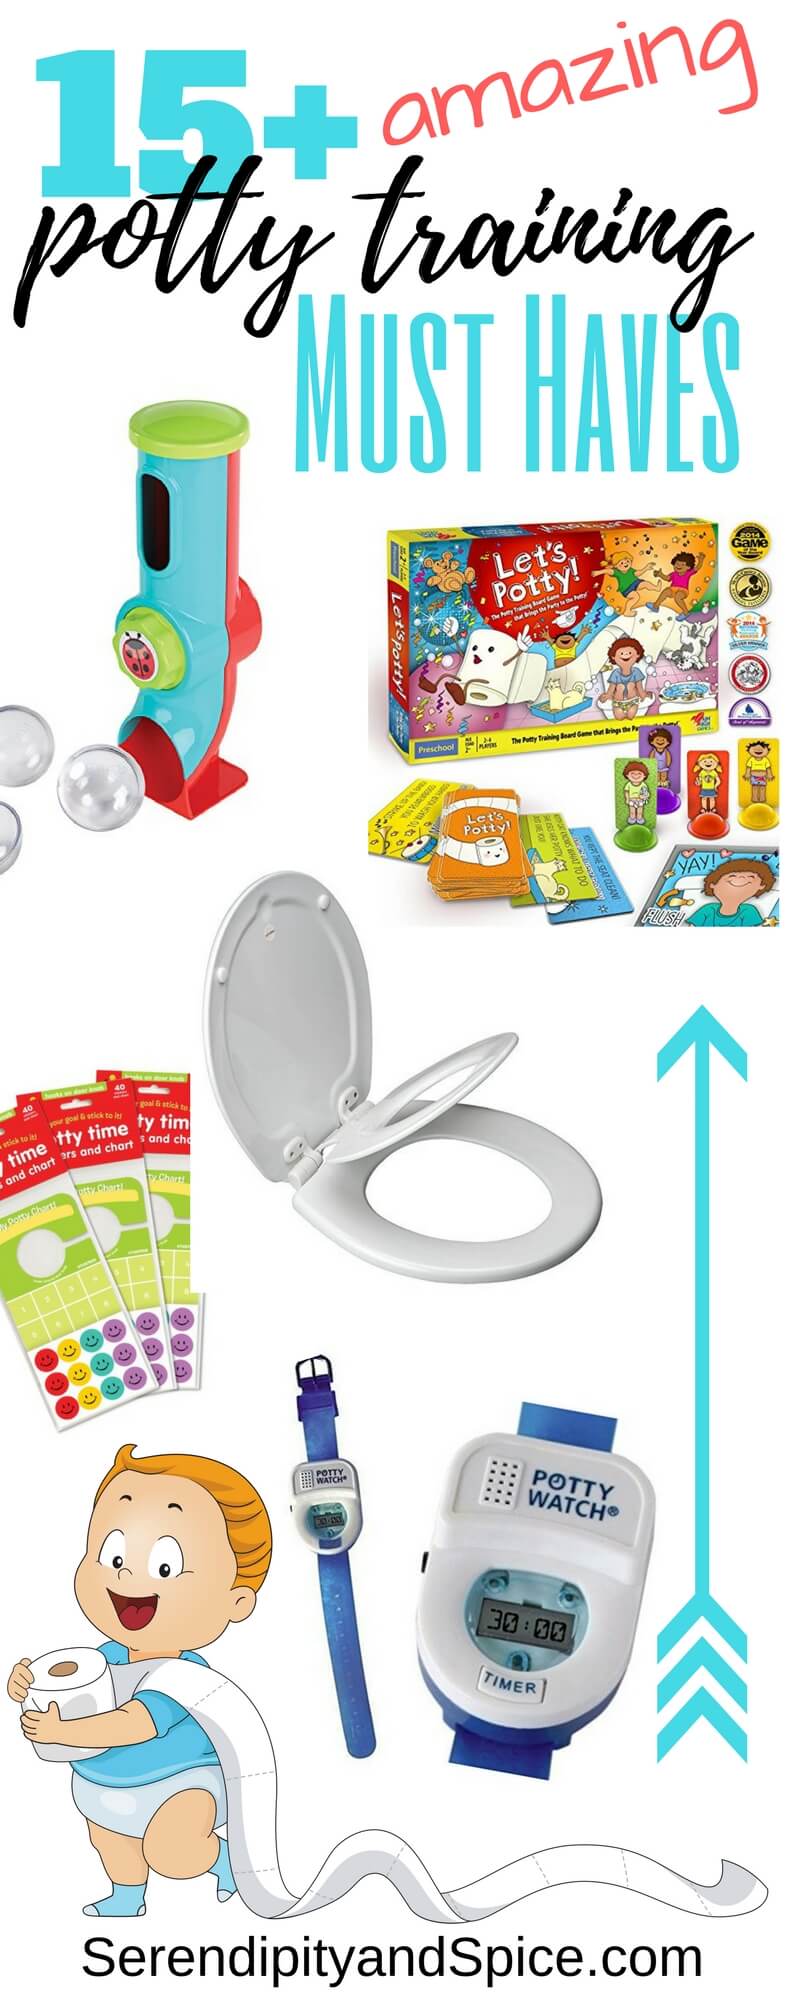 potty training must haves